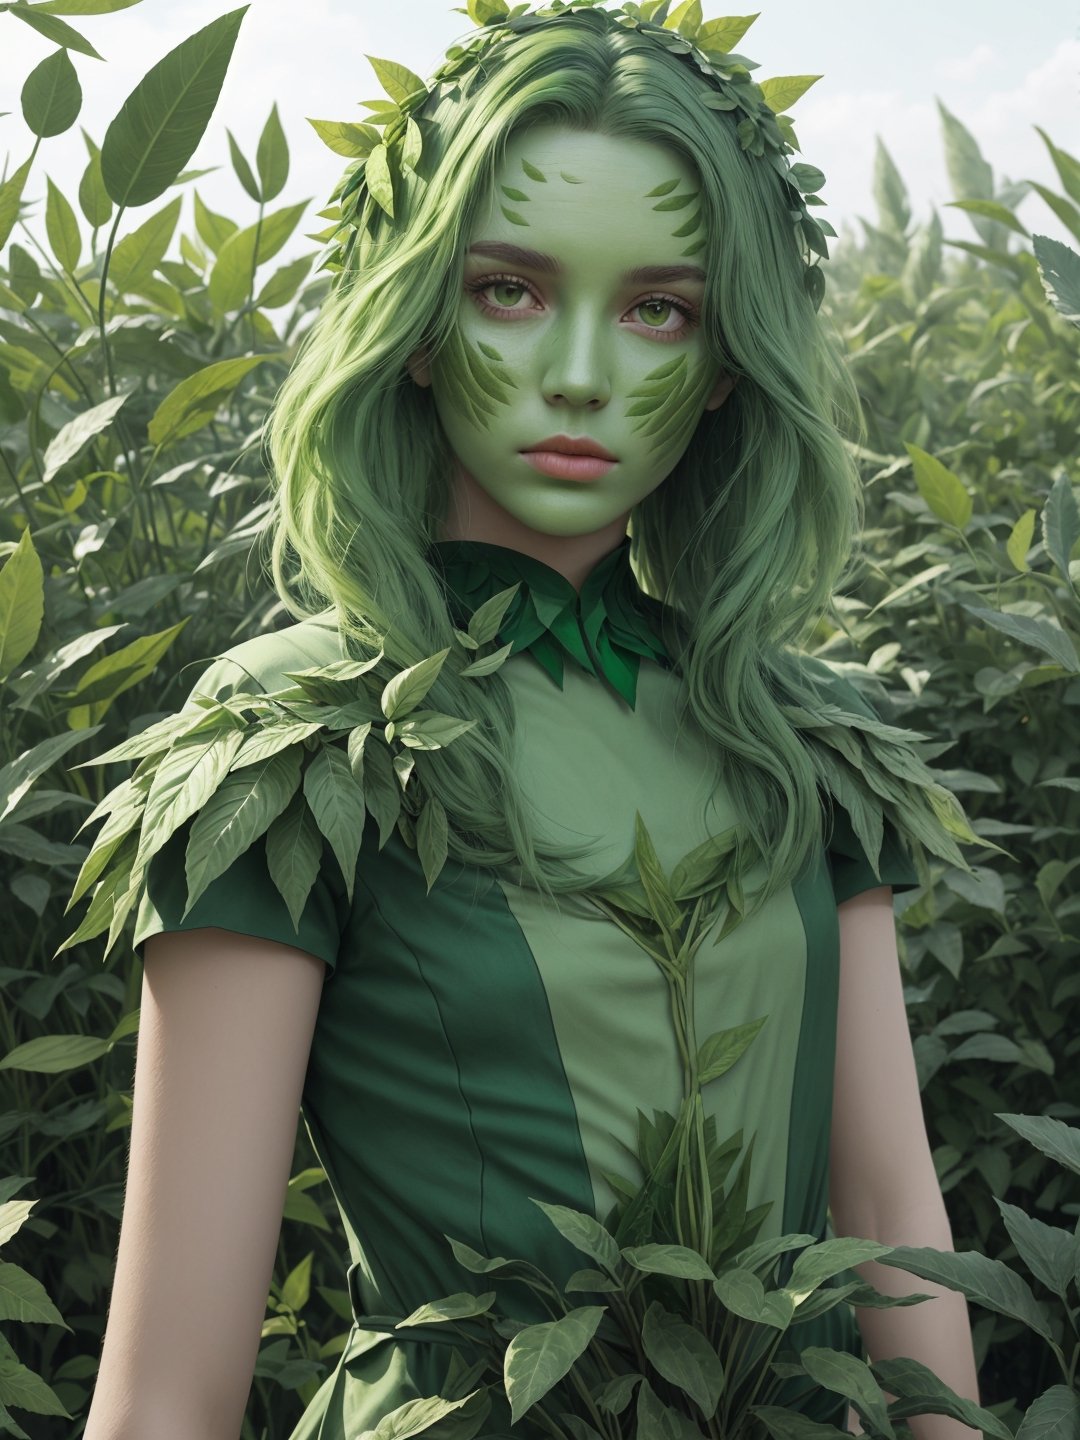 best quality, ultra detailed, ultra realistic, upper body, photo of plant woman of plants and leaves, (((green skin))), (((green body))), dress made of plants and leaves, green hair of plants and grass, outdoors, garden, daylight, 